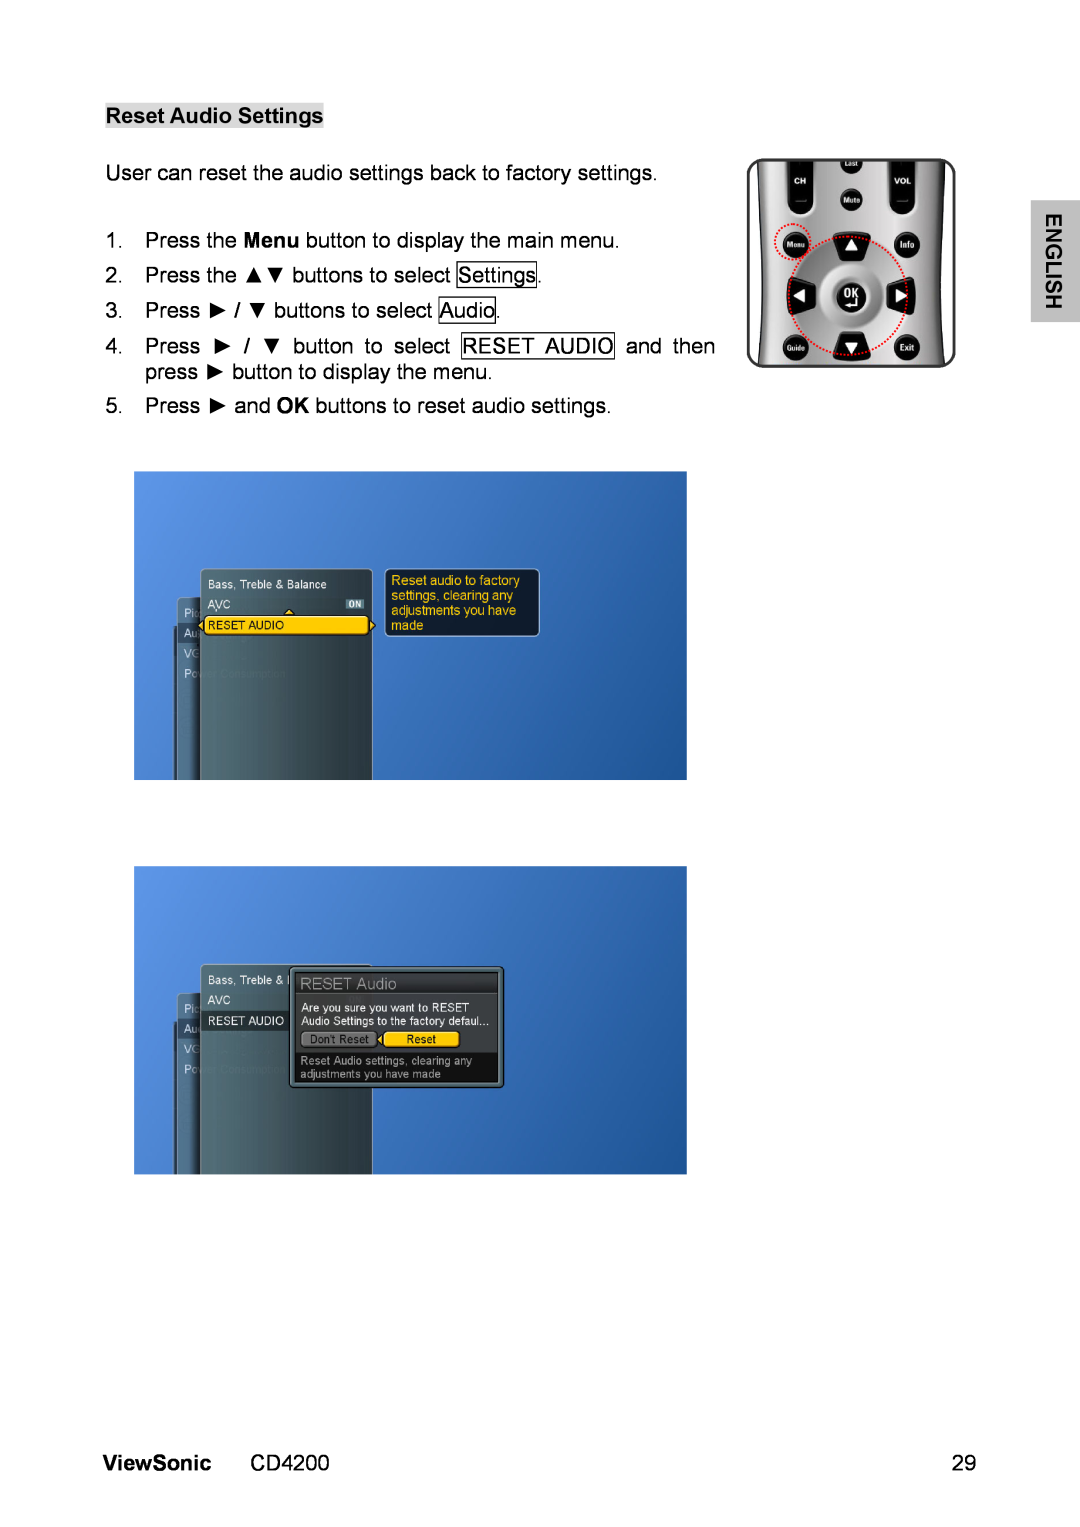 ViewSonic CD4200 manual Reset Audio Settings, User can reset the audio settings back to factory settings, English 